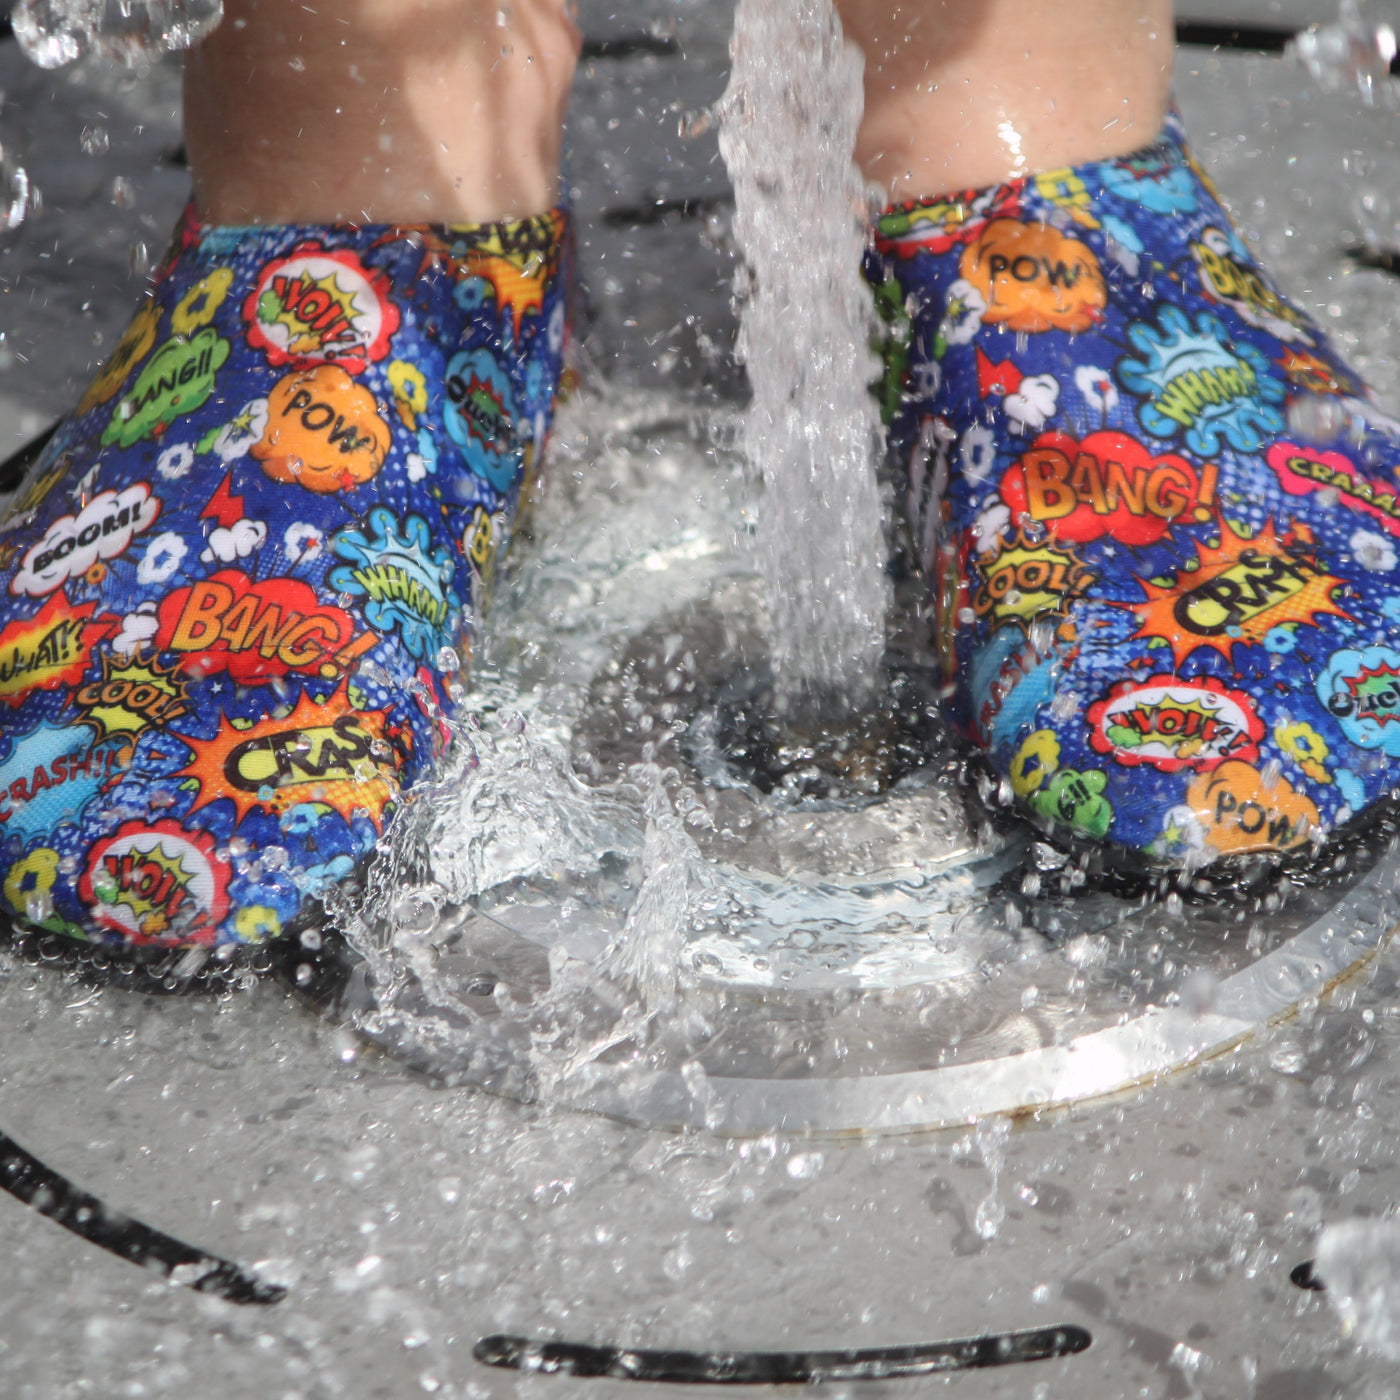 Lifestyle image of kid wearing superhero themed non-slip shoes, in a pool shower.